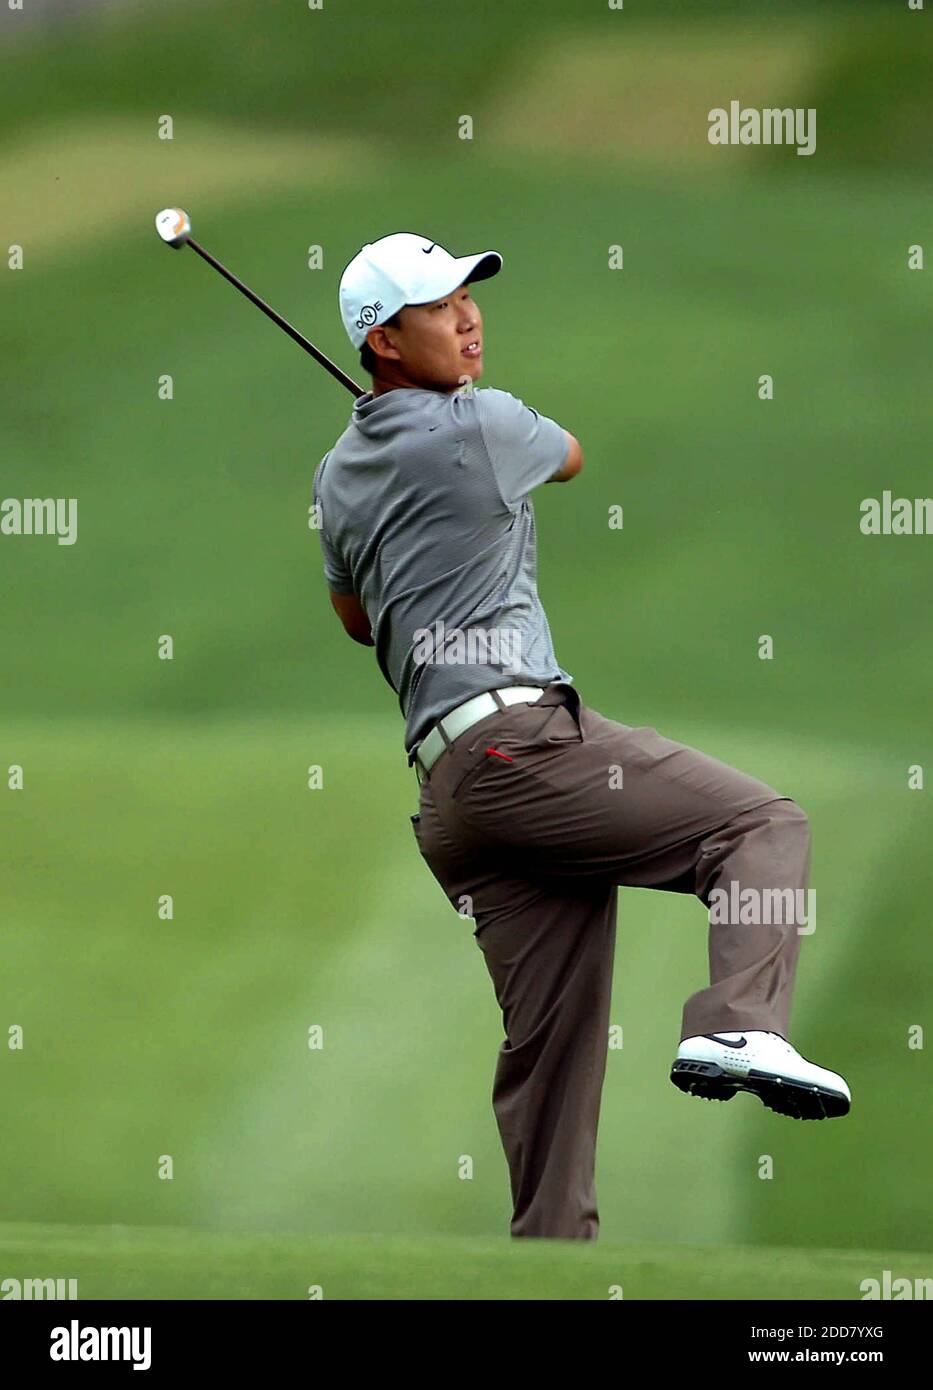 NO FILM, NO VIDEO, NO TV, NO DOCUMENTARY - Anthony Kim kicks his leg up after hitting a shot off the 15th fairway during the final round of the Wachovia Championship at Quail Hollow Club in Charlotte, NC, USA on May 4, 2008. Kim won the tournament, finishing at -16 under for the tournament. Photo by Layne Bailey/Charlotte Observer/MCT/ABACAPRESS.COM Stock Photo